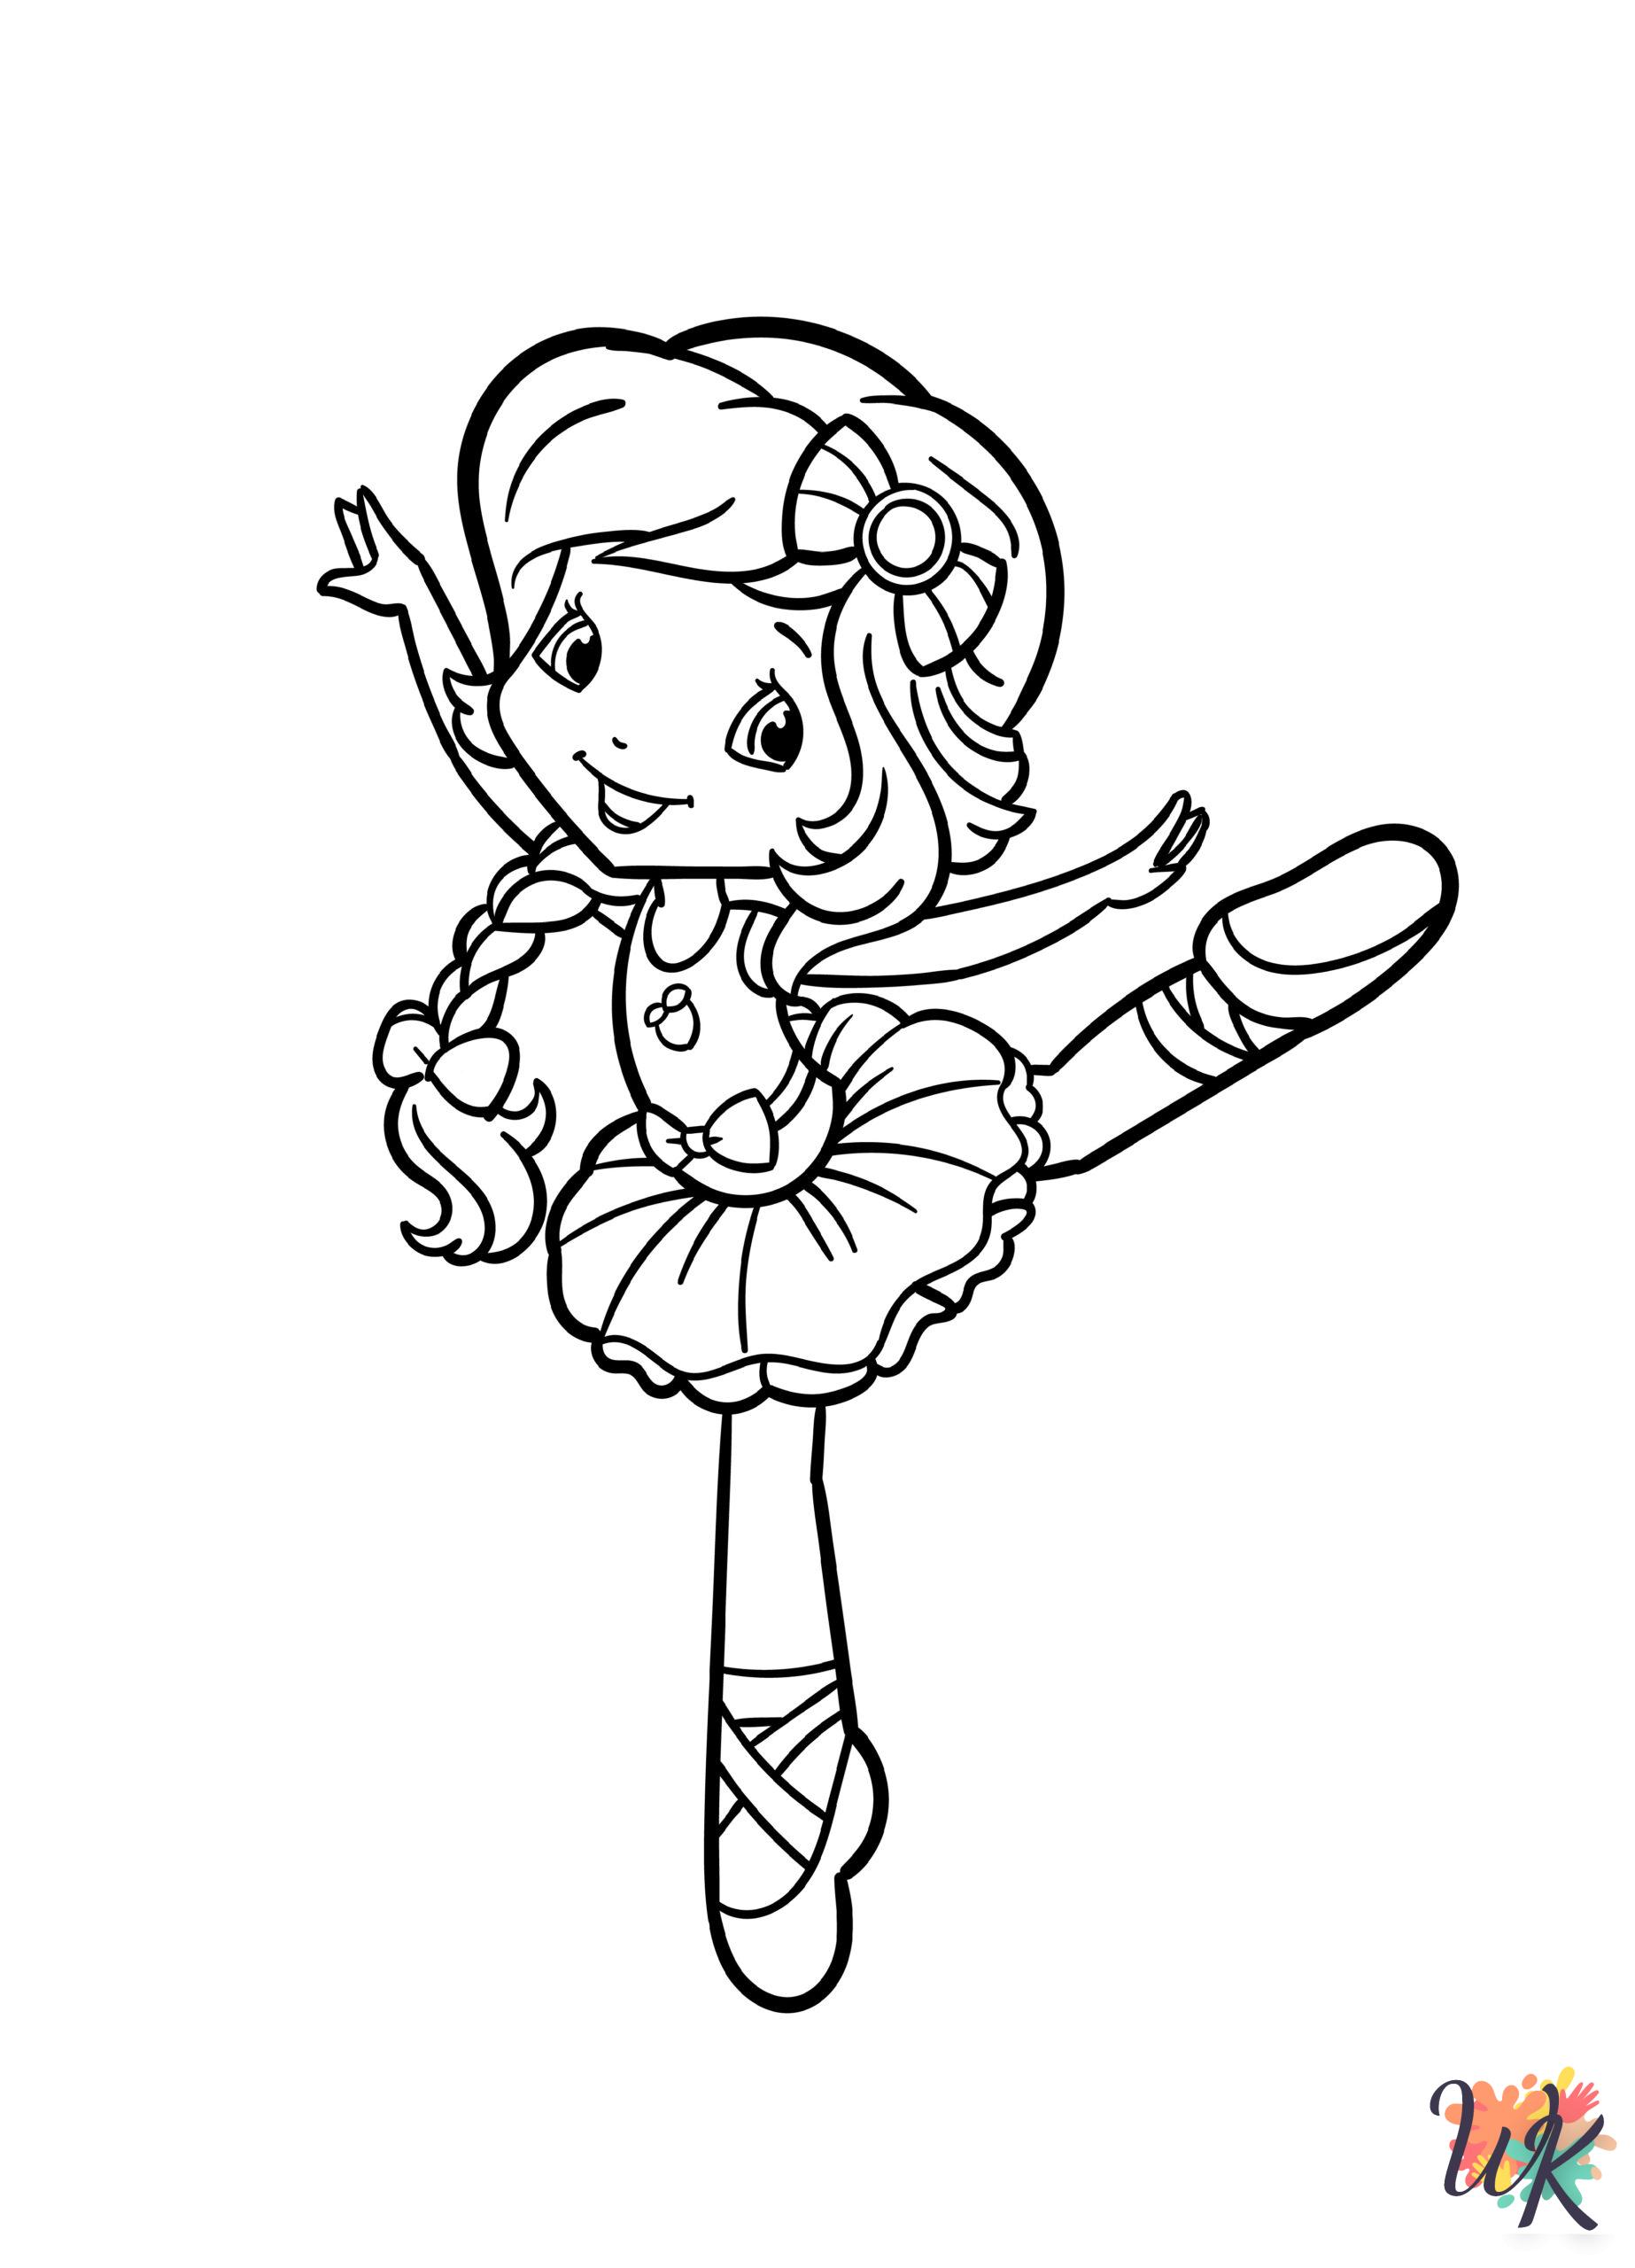 free full size printable Strawberry Shortcake coloring pages for adults pdf